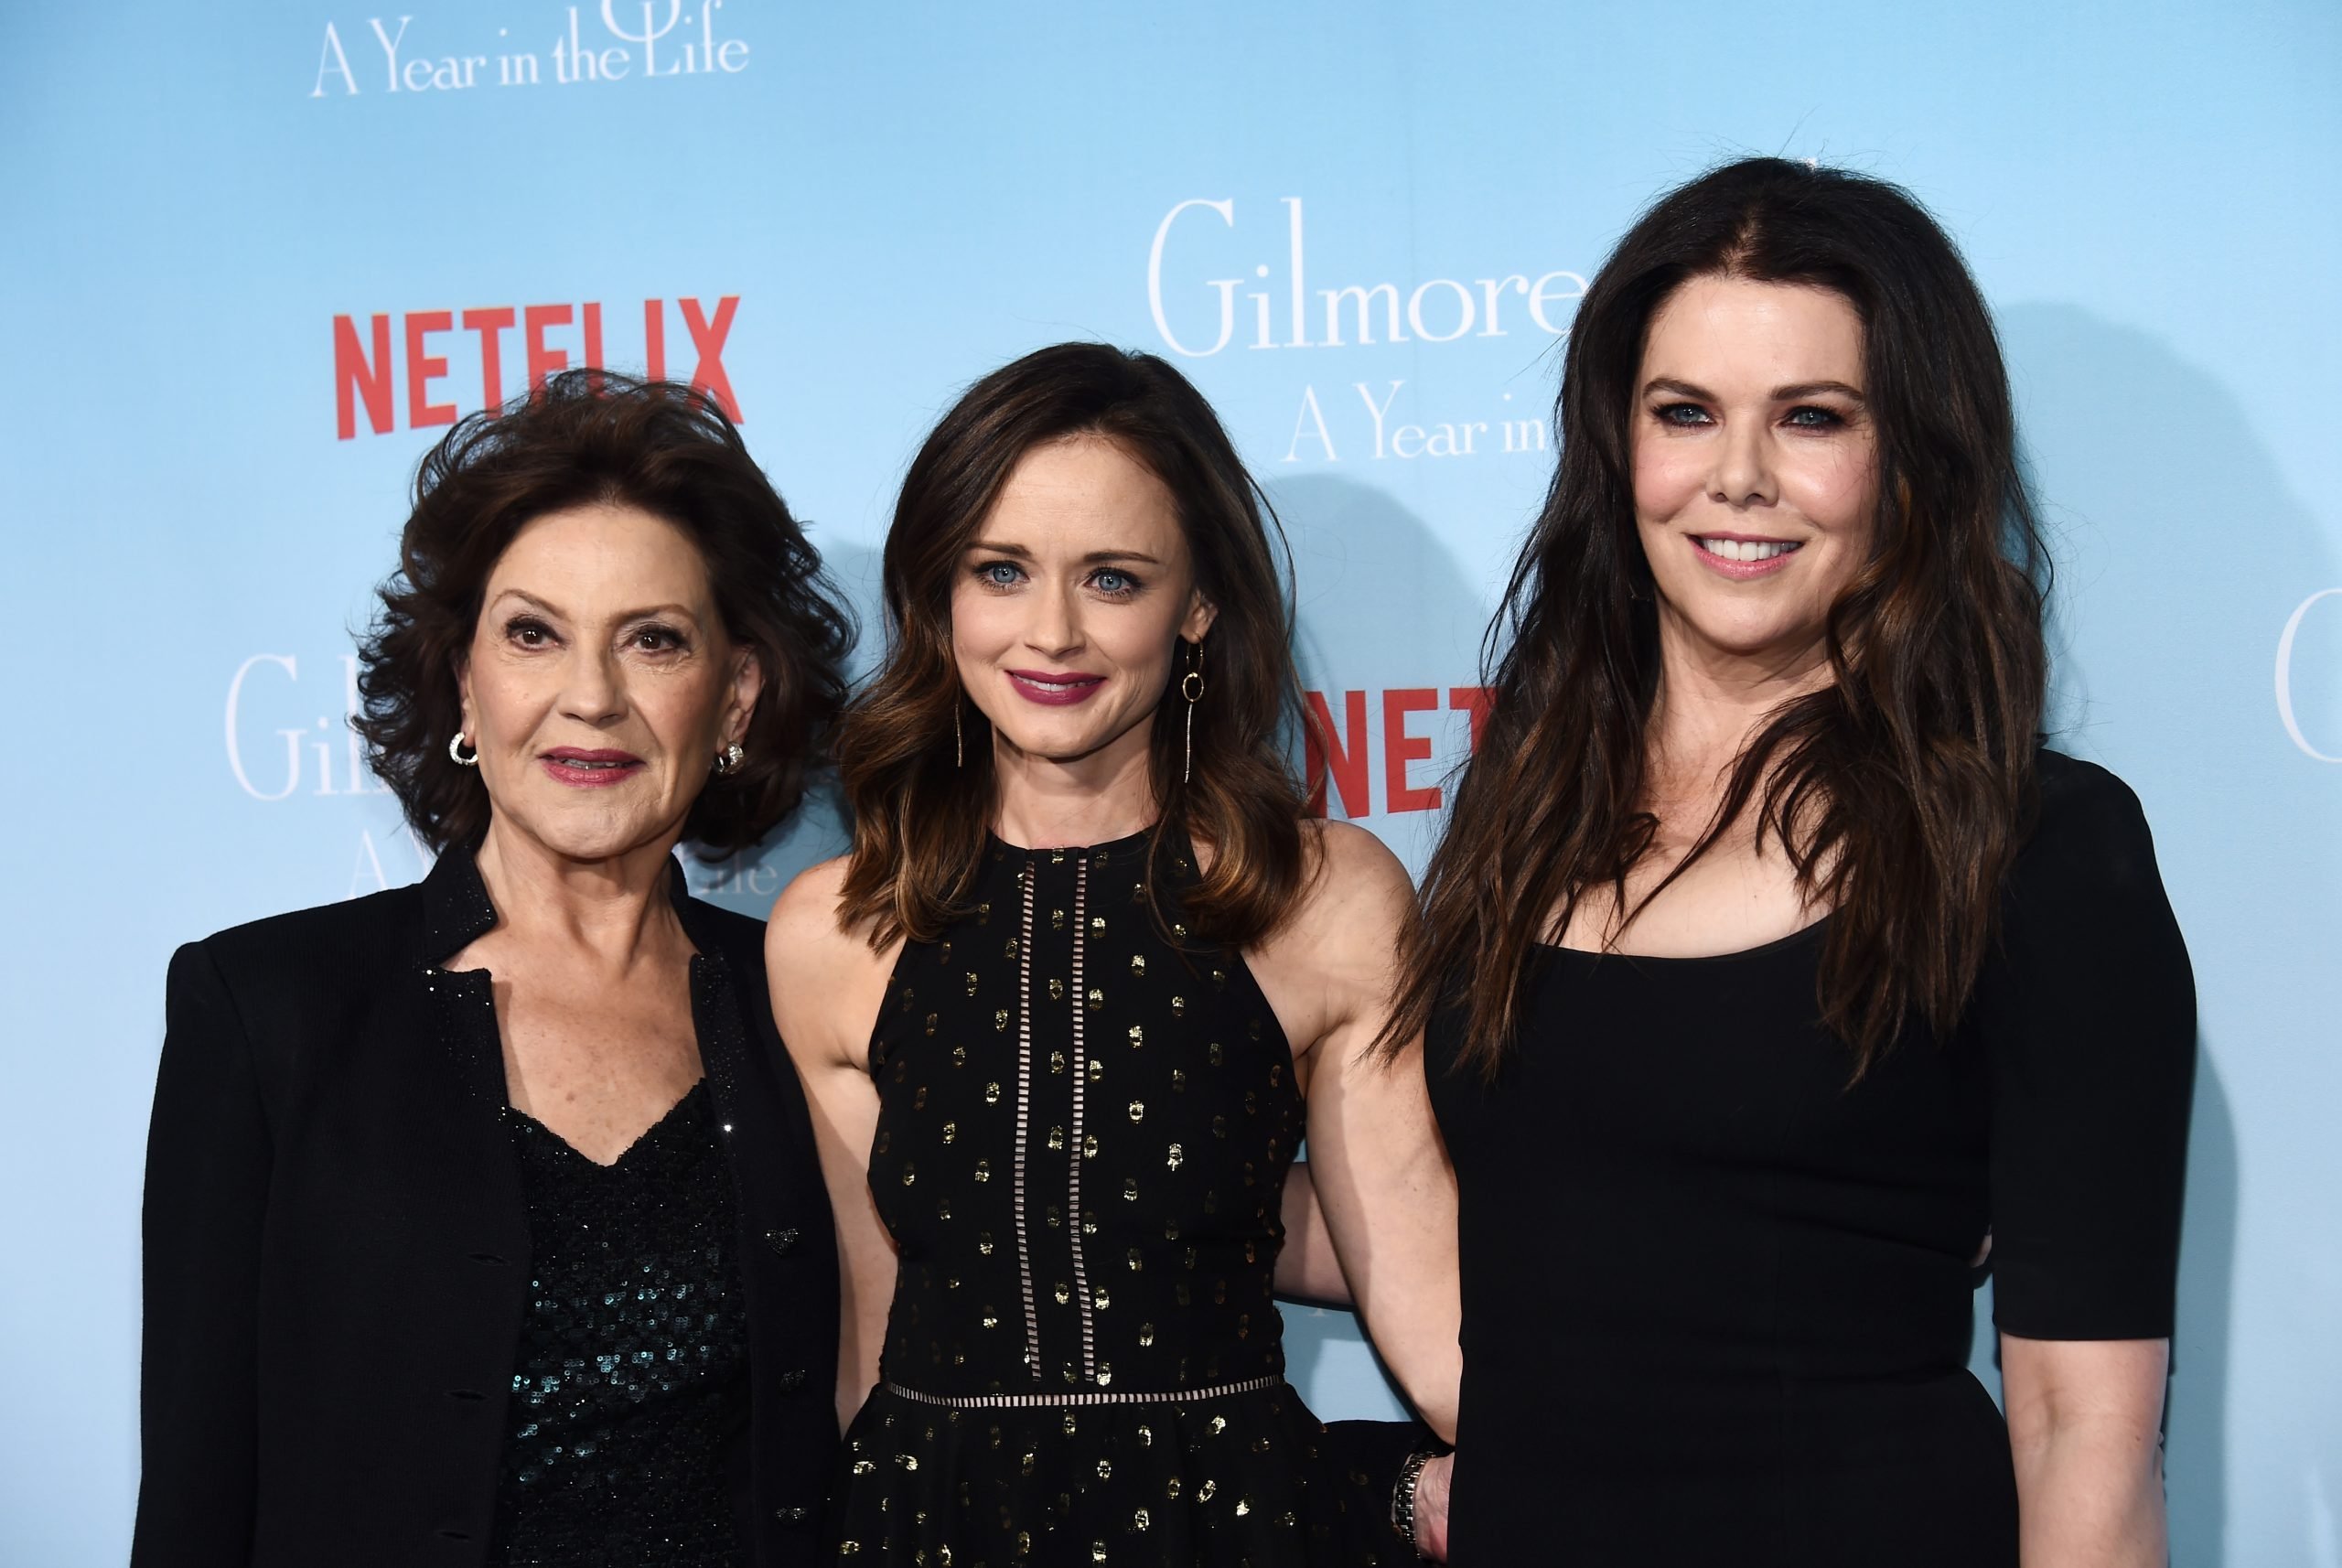 Kelly Bishop, Alexis Bledel and Lauren Graham at the premiere of 'Gilmore Girls: A Year in the Life' posing for photographers in black outfits